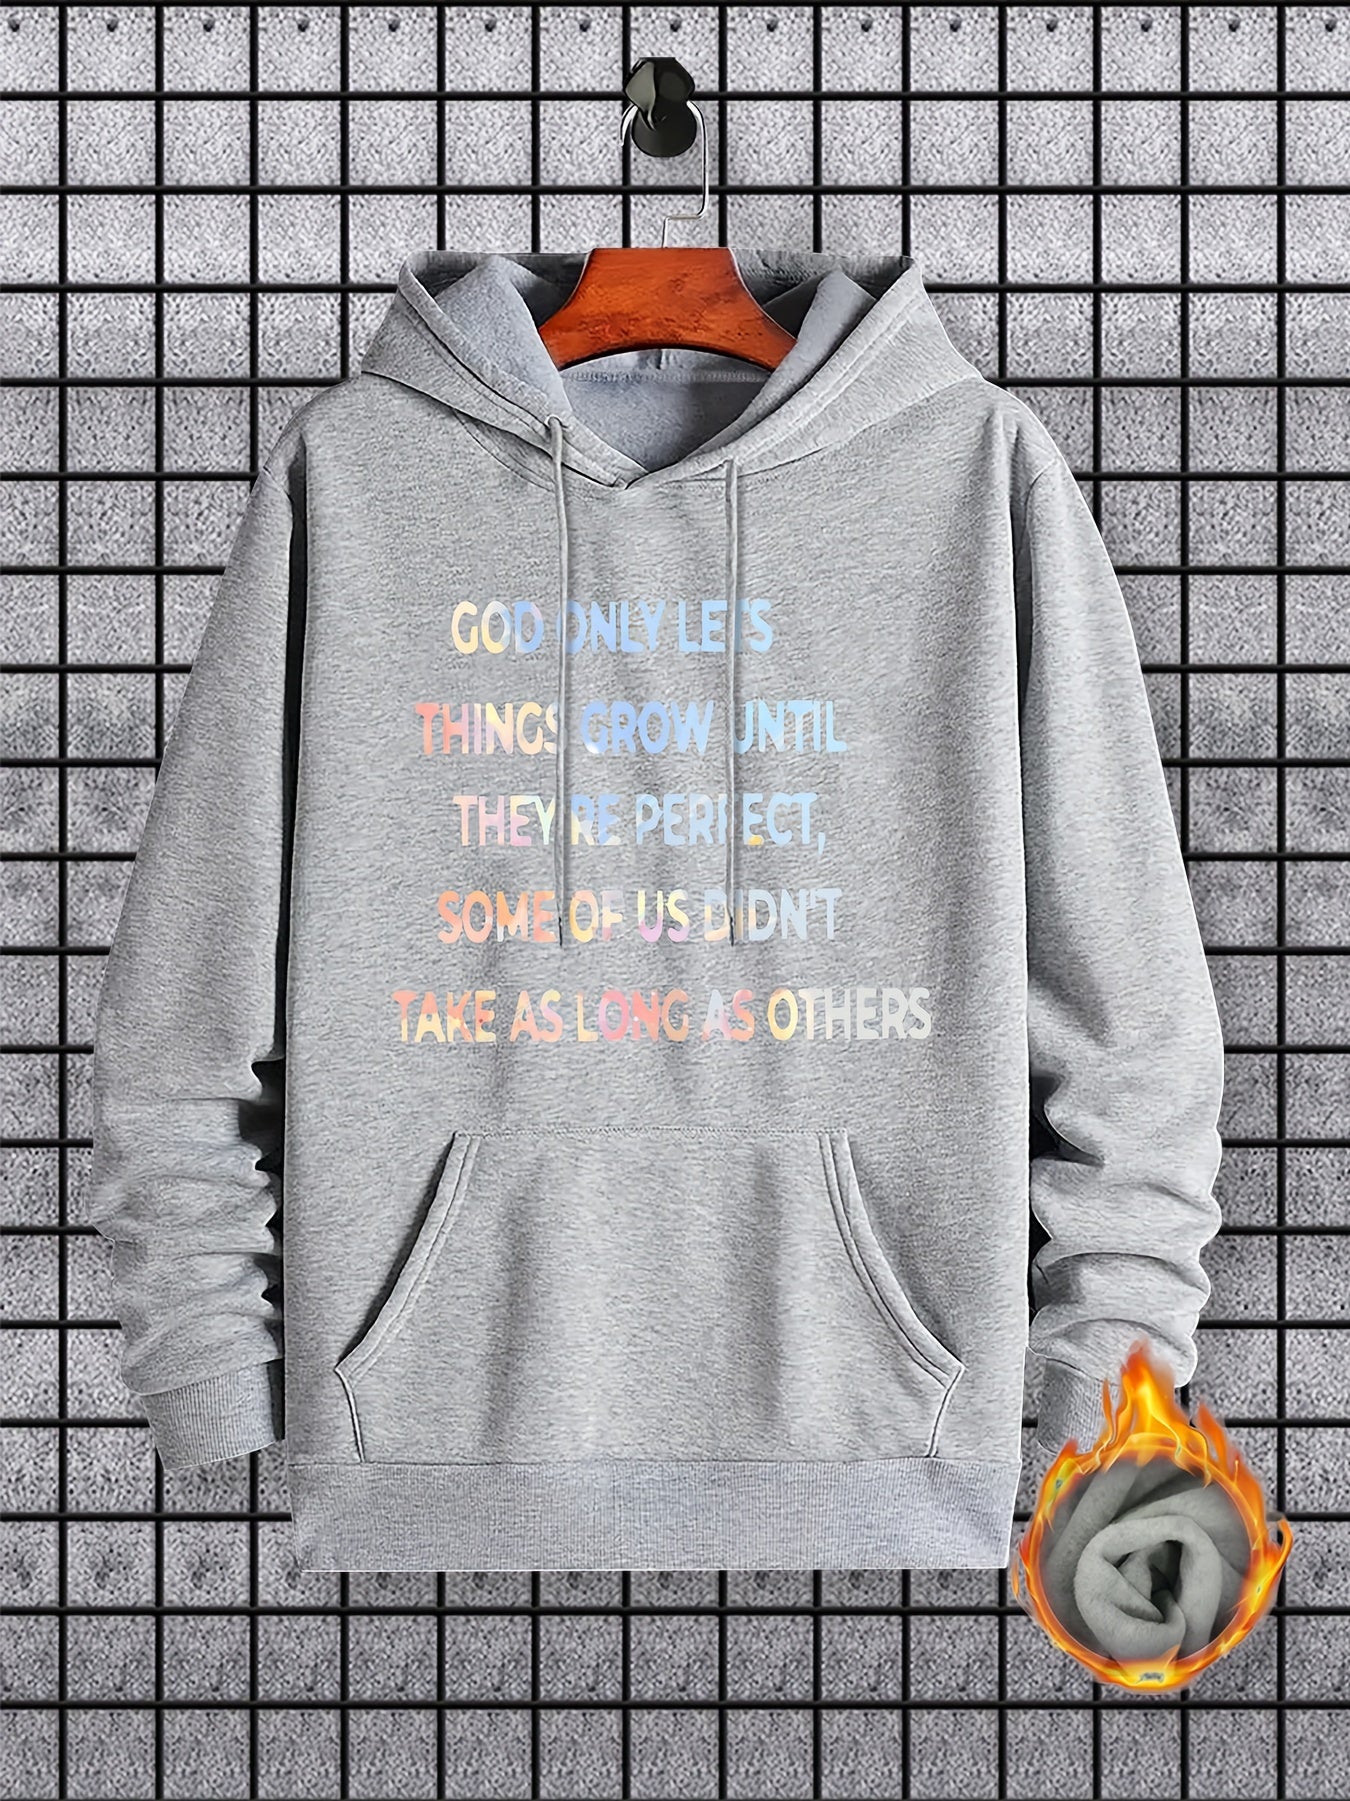 God Only Let's Things Grown Until They're Perfect Men's Christian Pullover Hooded Sweatshirt claimedbygoddesigns